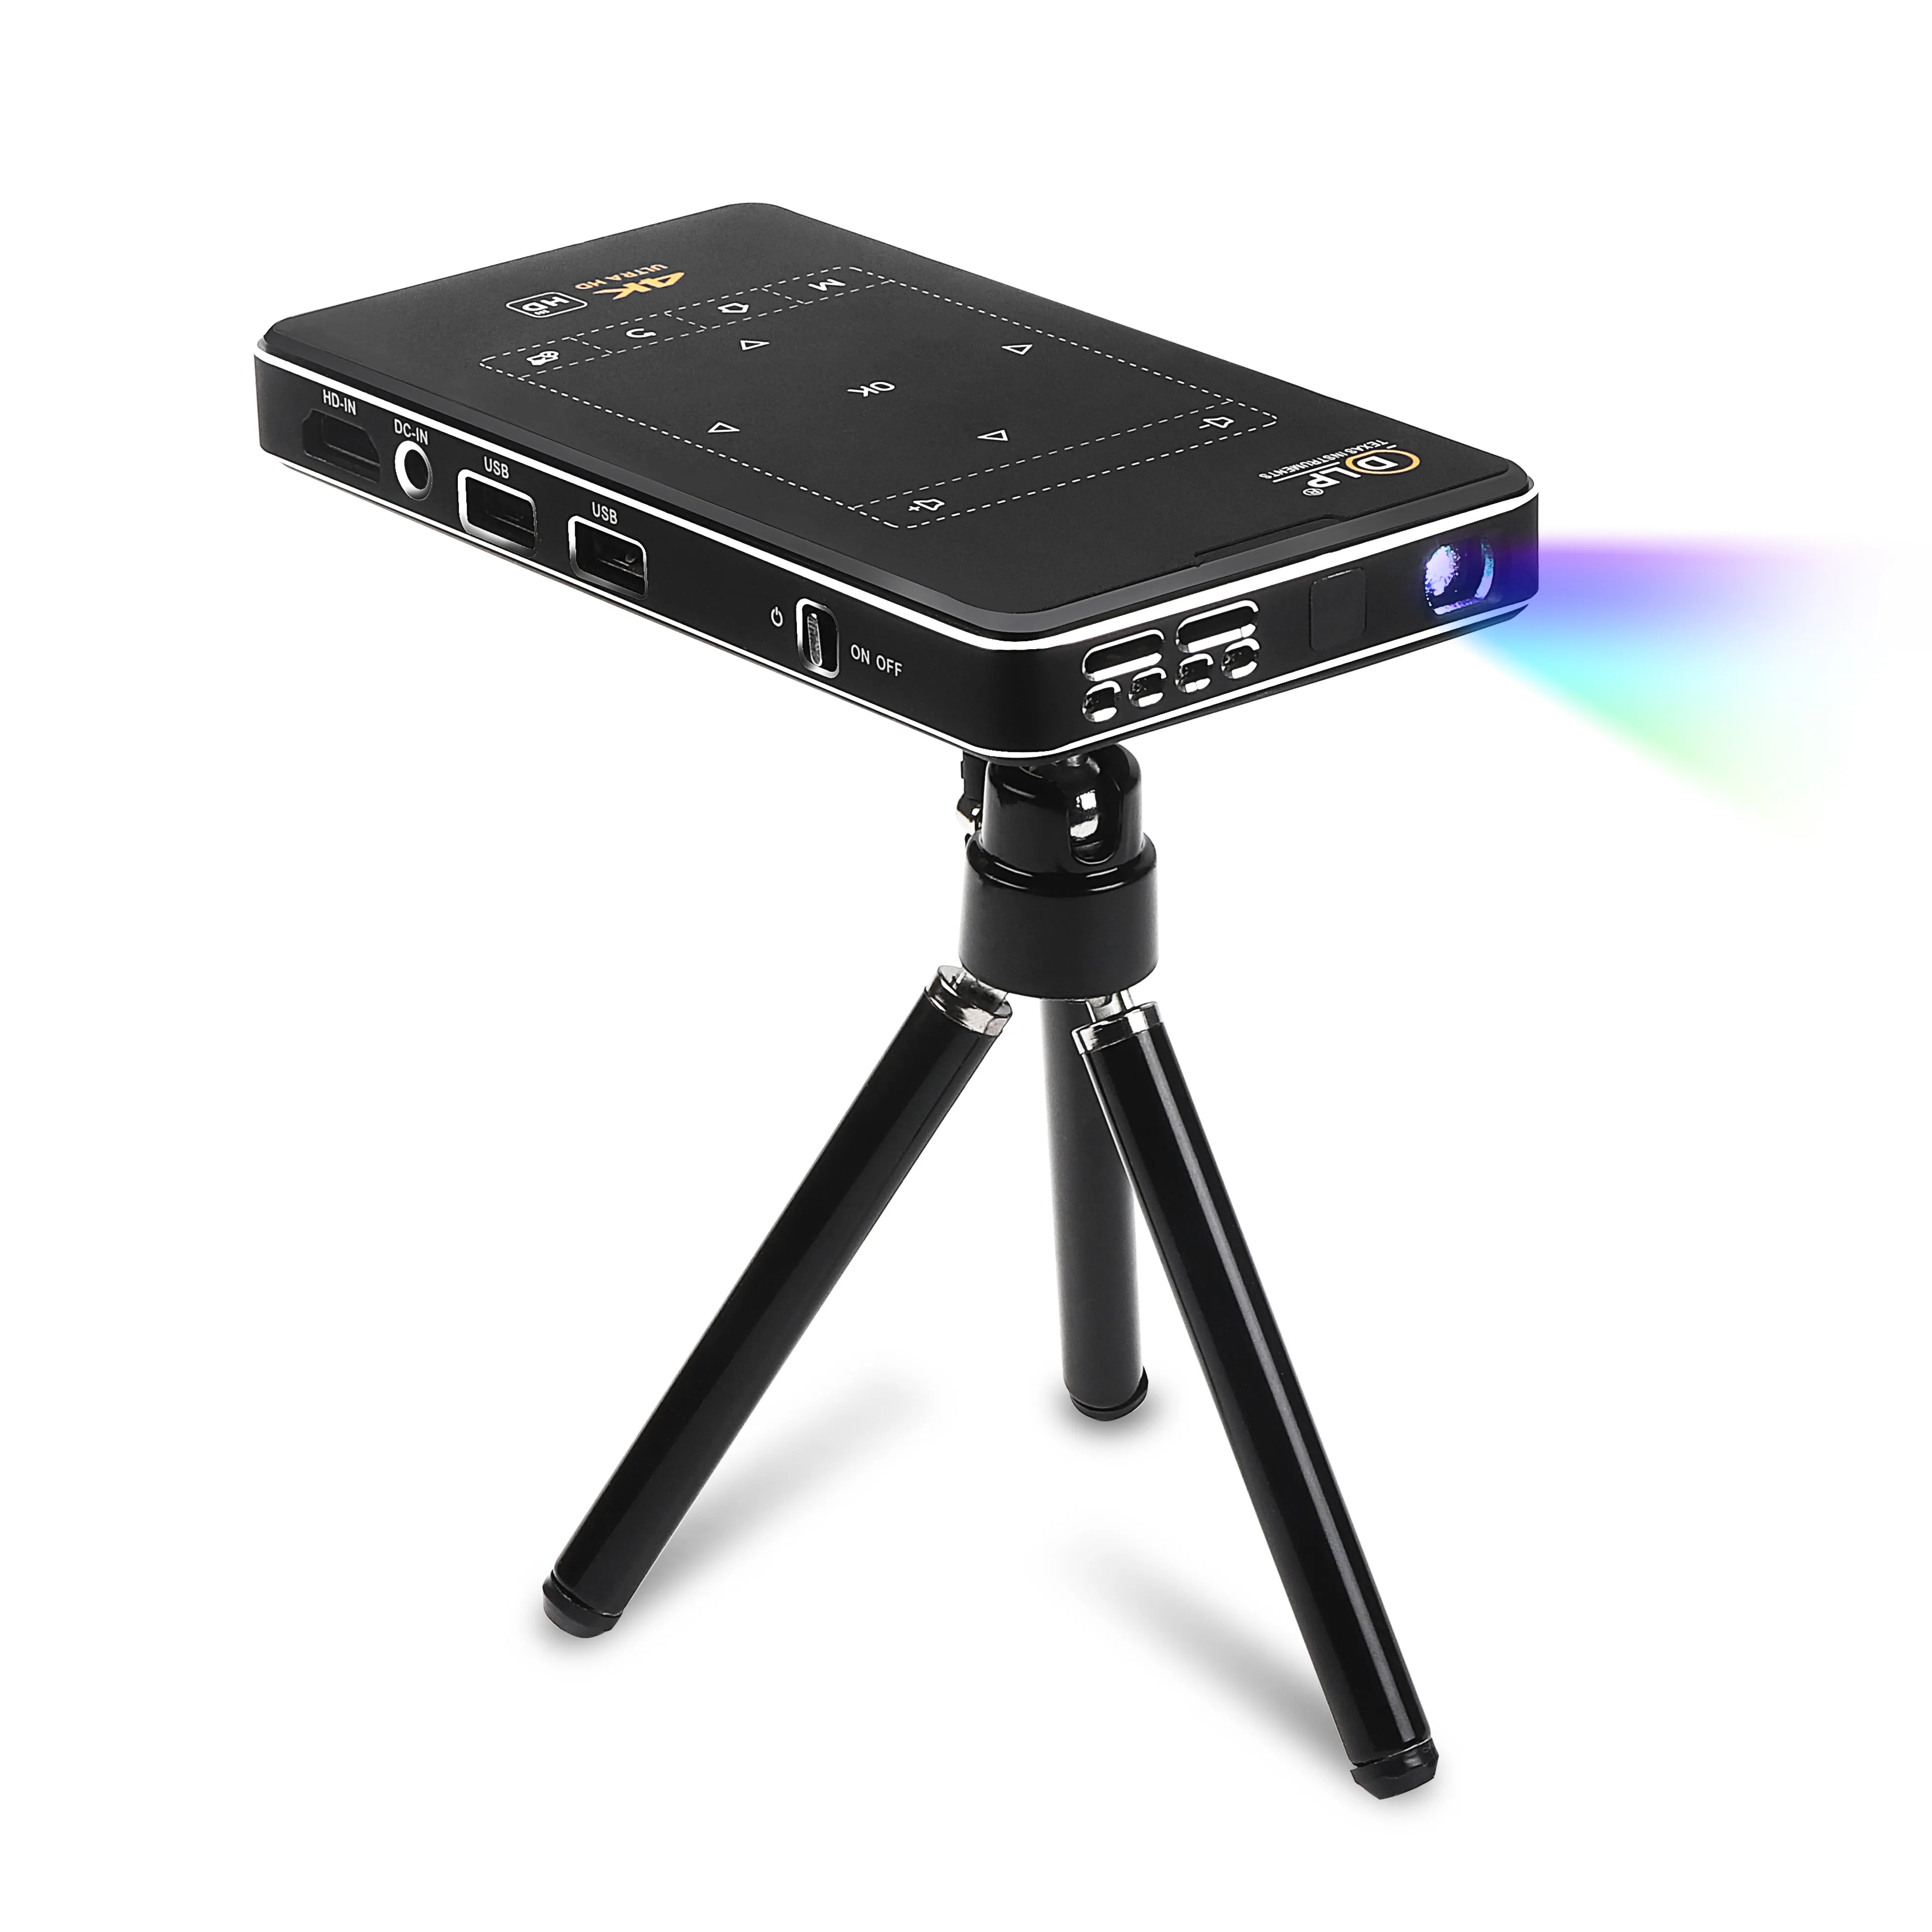 HD DLP Projector Mini Ansi 100lumens 1080P Proyector Portable Android 9.0 Support 4K@60fps Projector